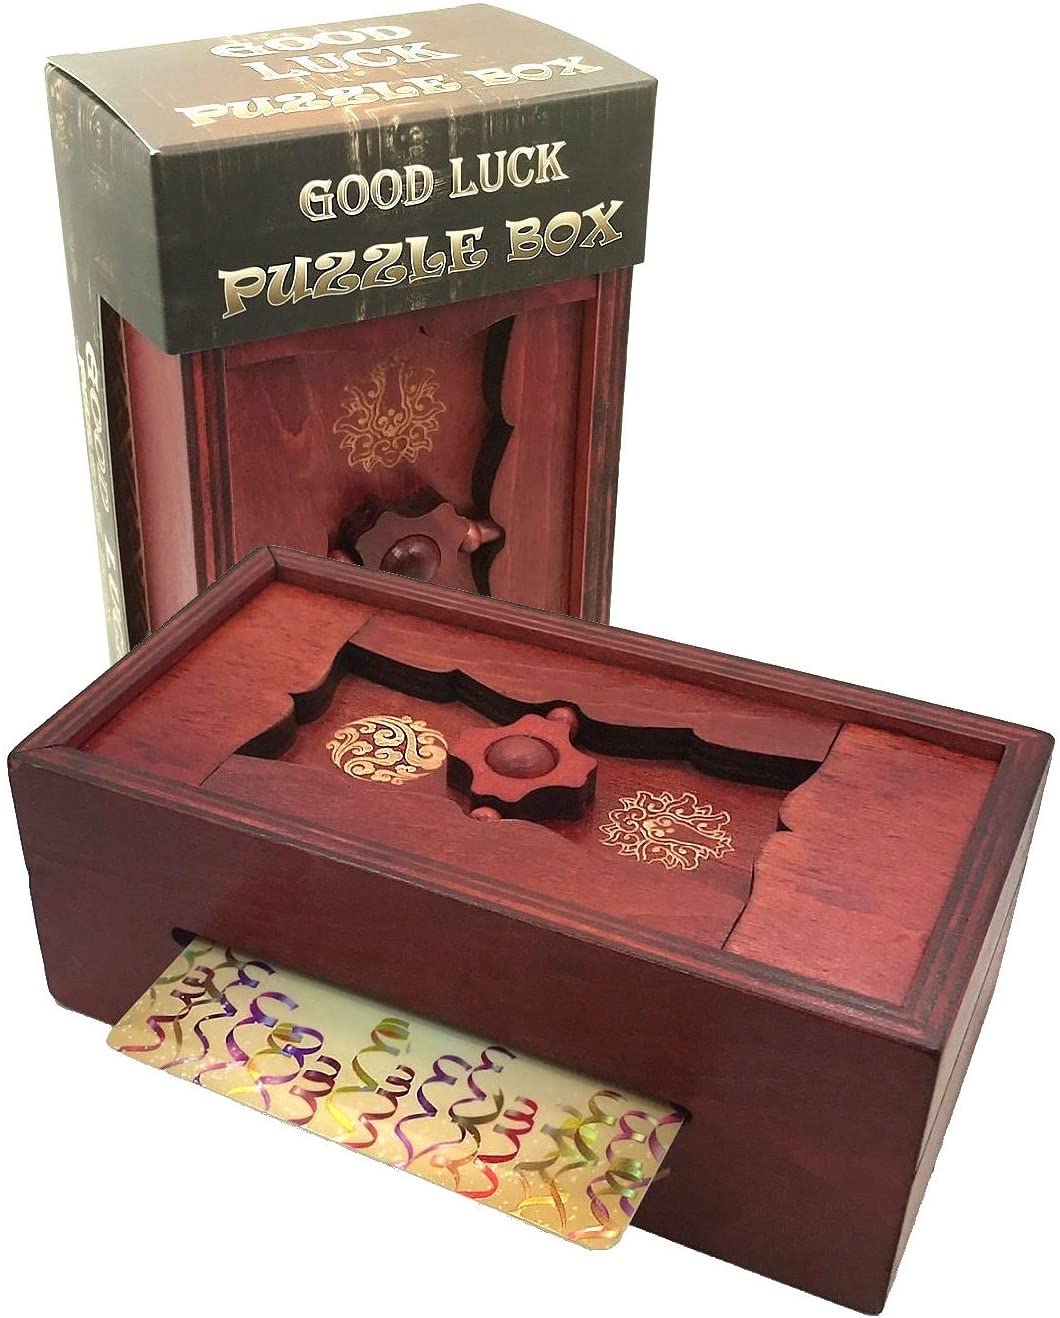 Money and Gift Card Holder in a Wood Magic Trick Lock with Two Hidden Compartments Brainteaser Toy Treasure Secret Puzzle Box 